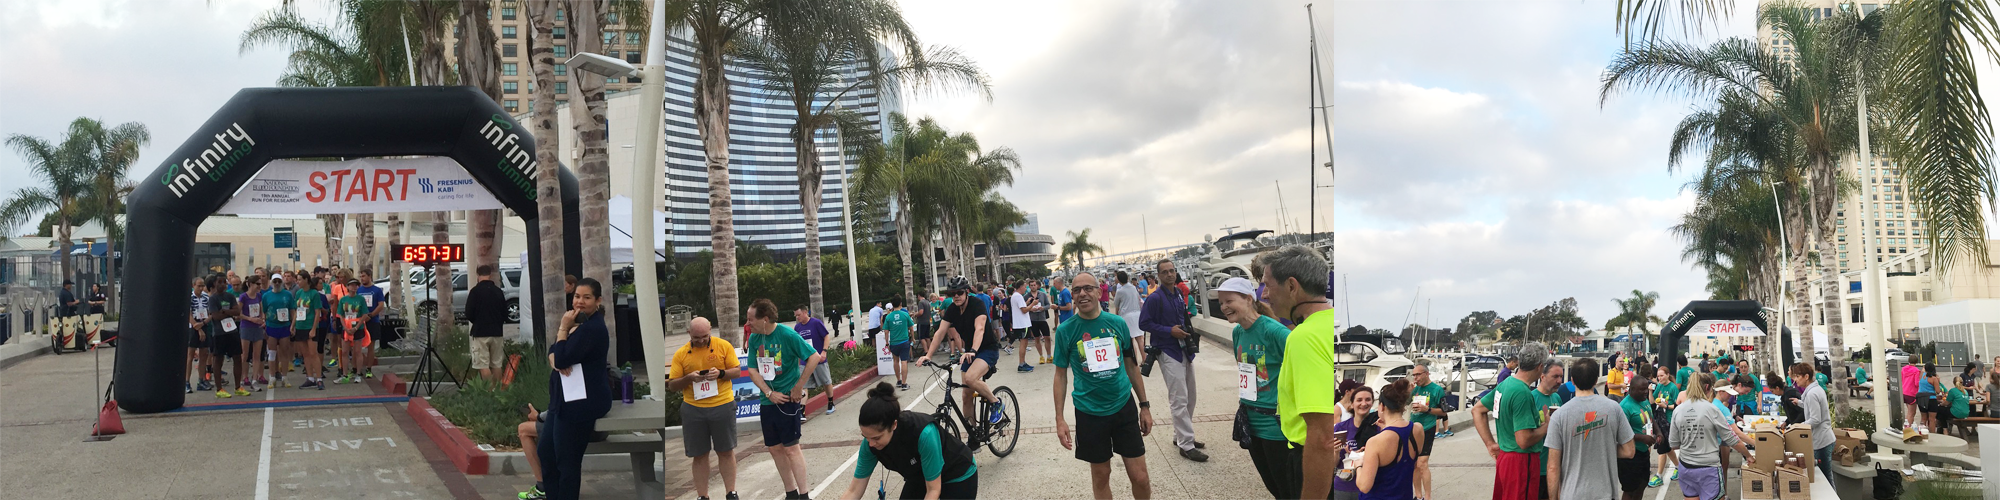 5K Convention Races and Walks